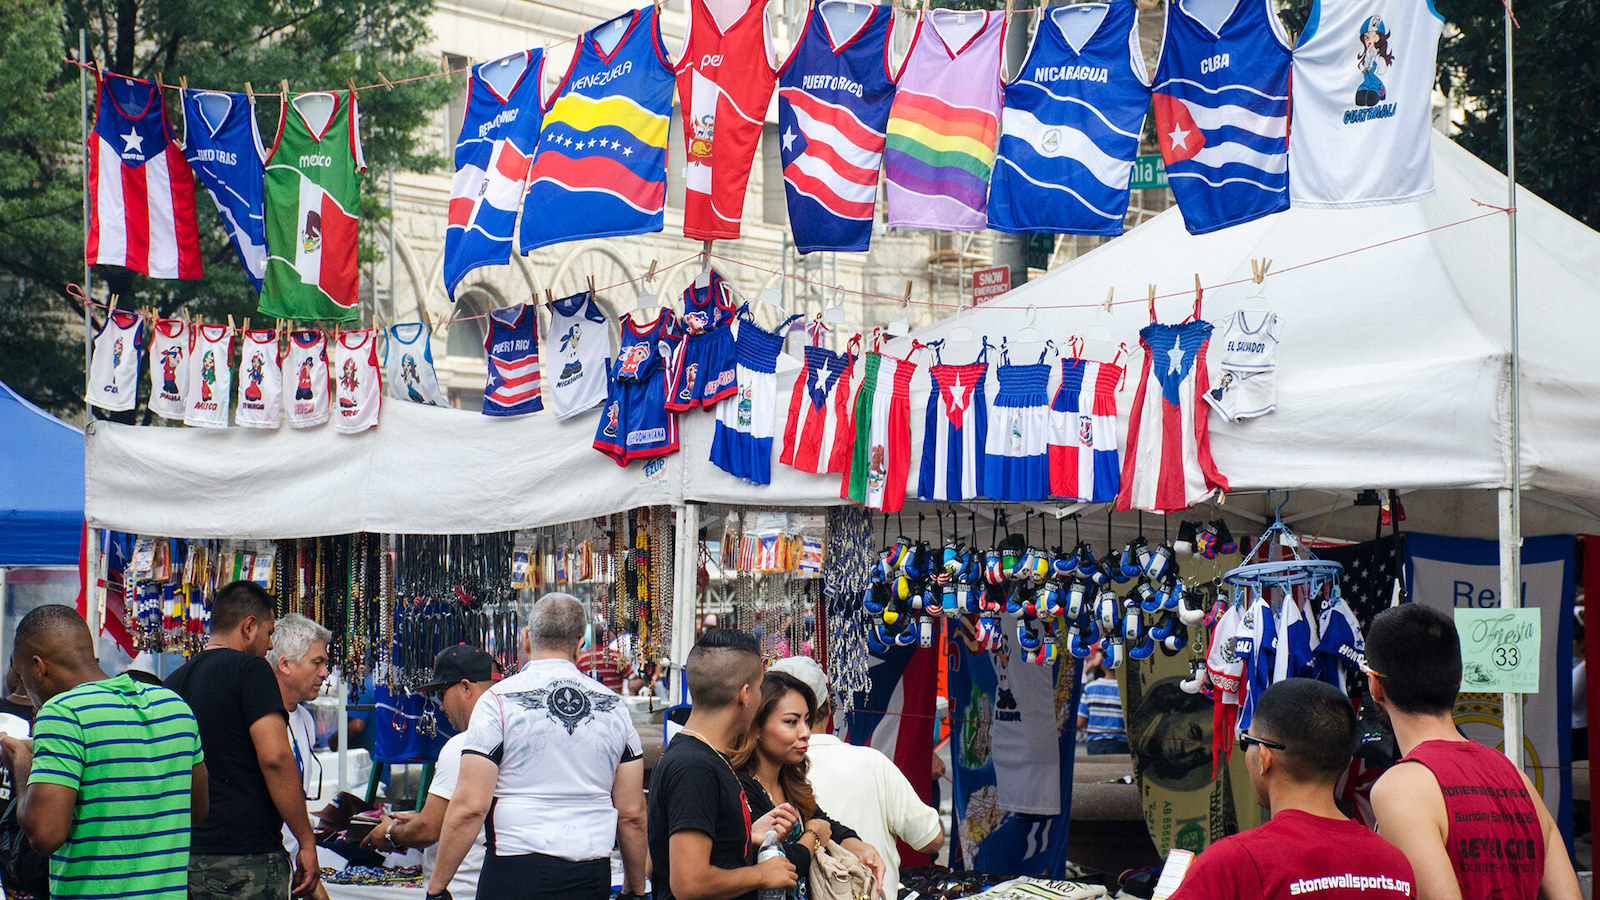 The flags of many nations that contribute to the Washington, D.C., area’s Spanish-speaking population.